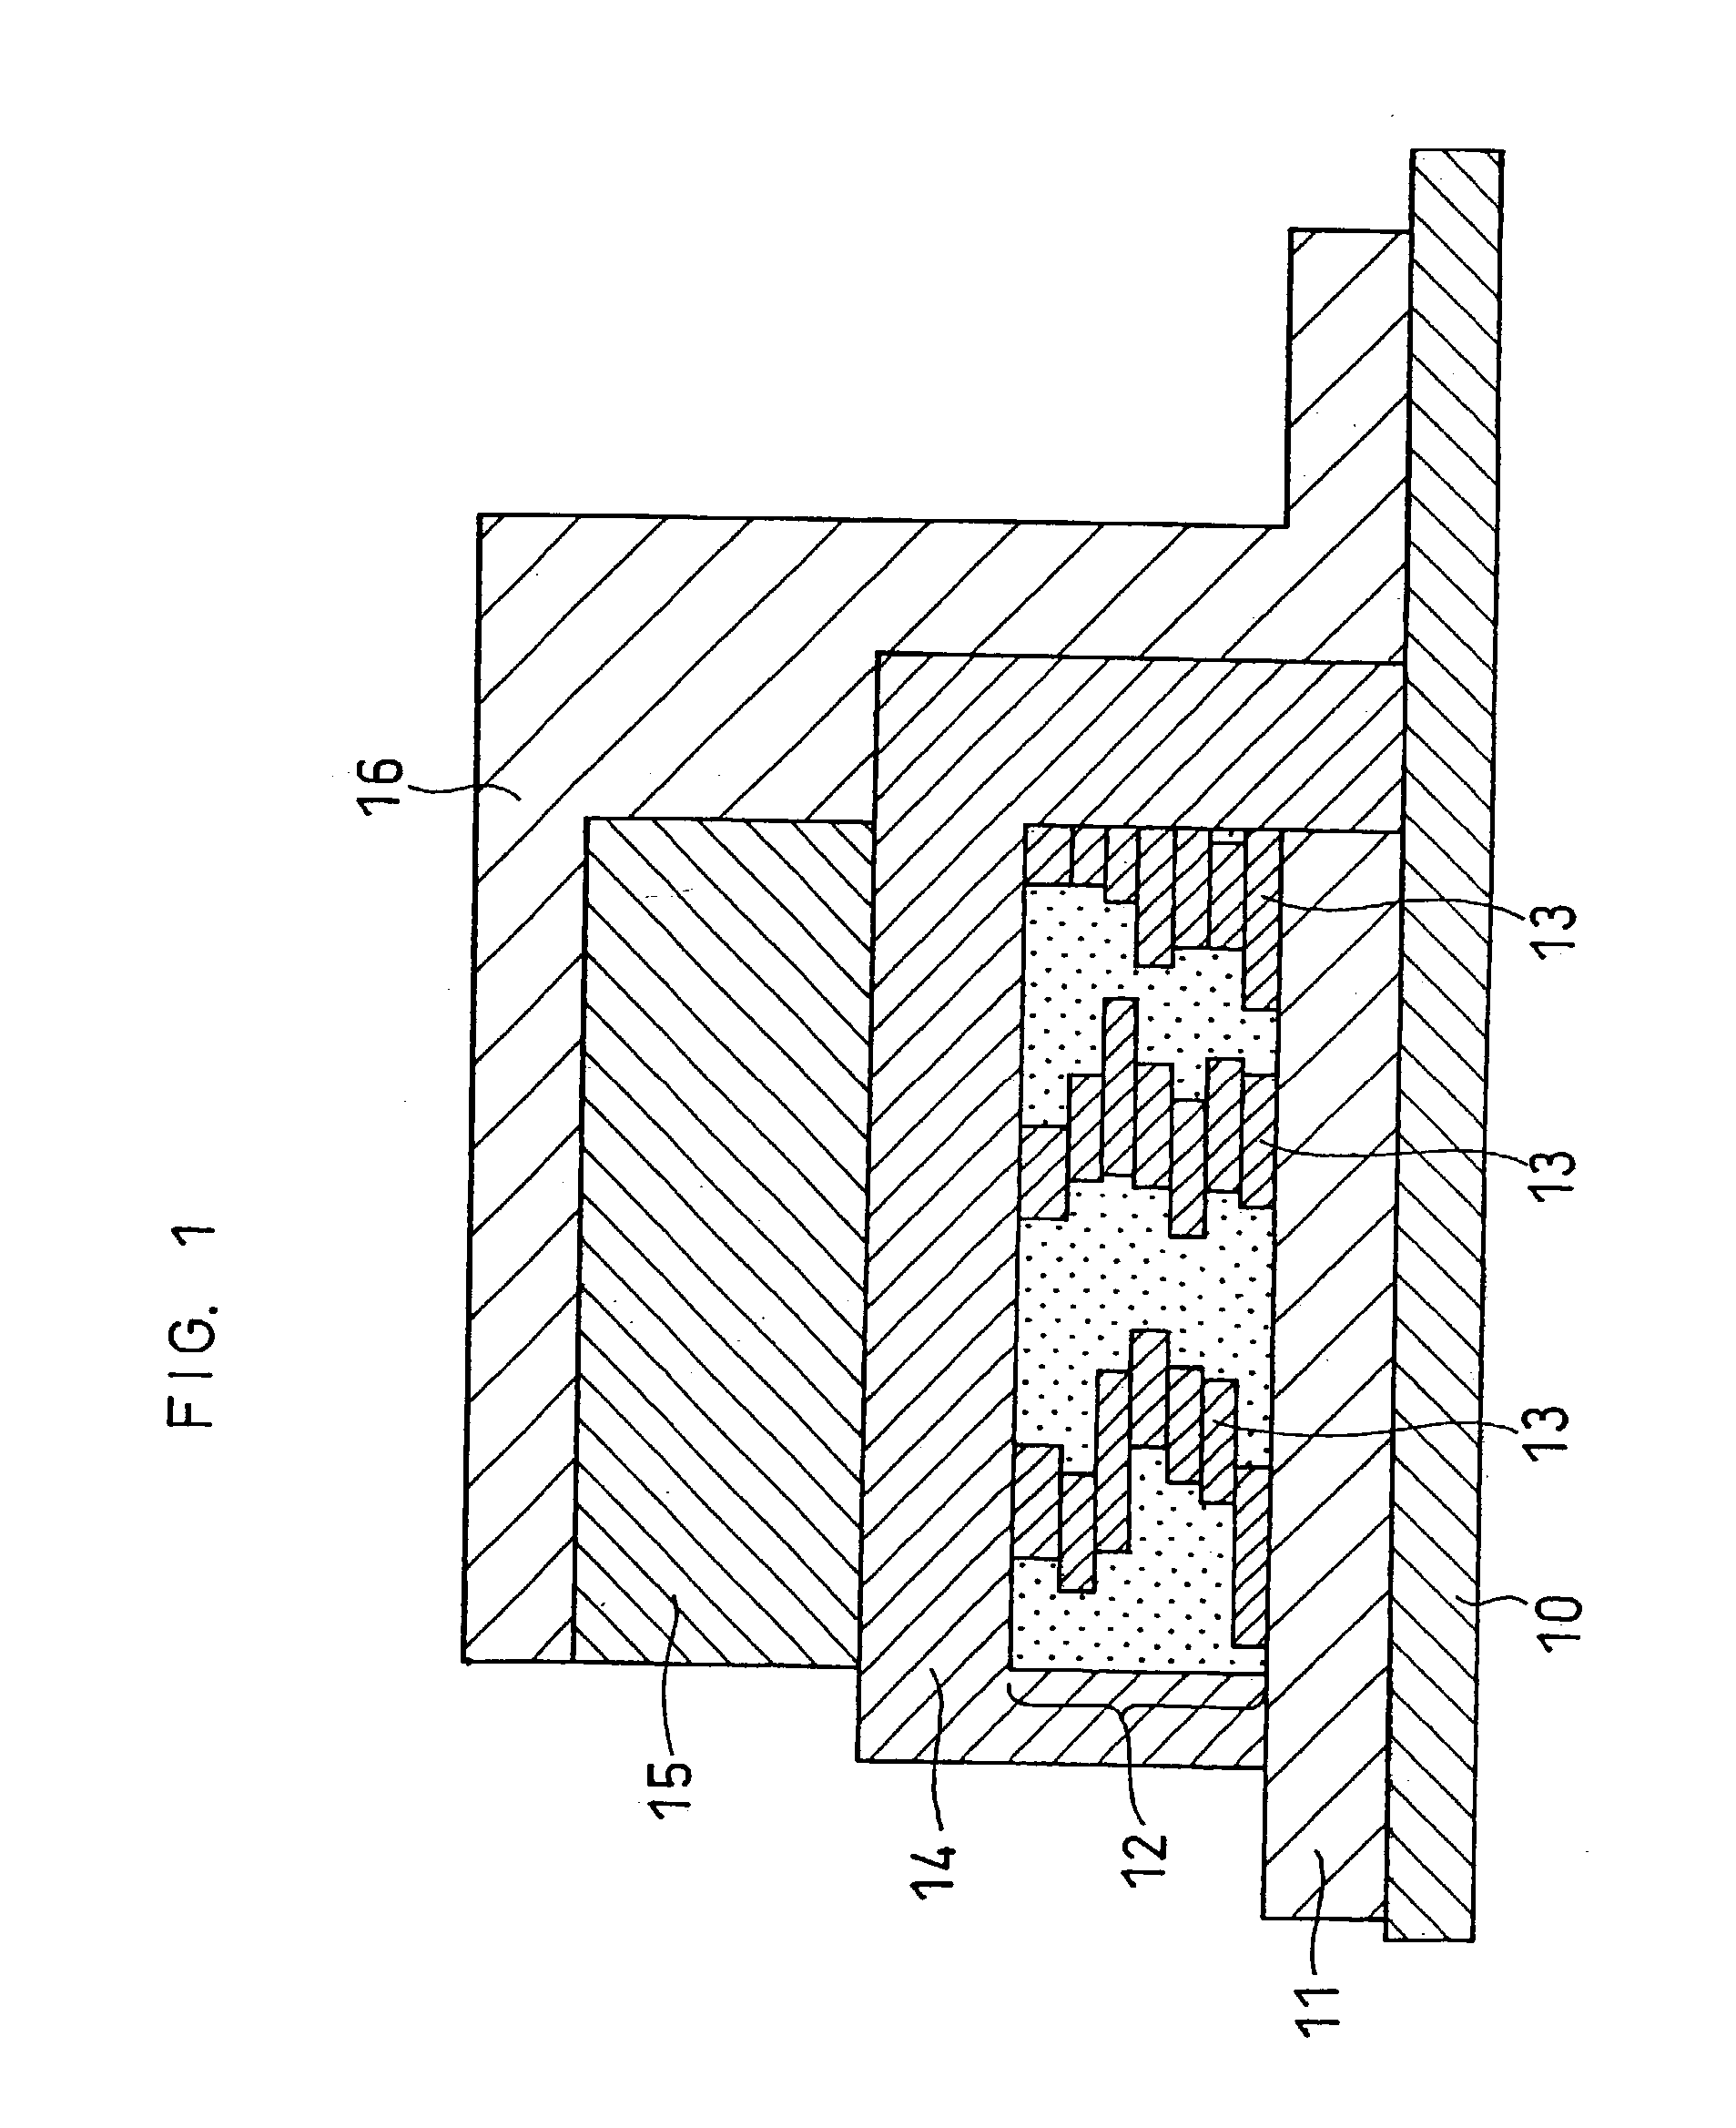 Secondary battery and method of producing the same